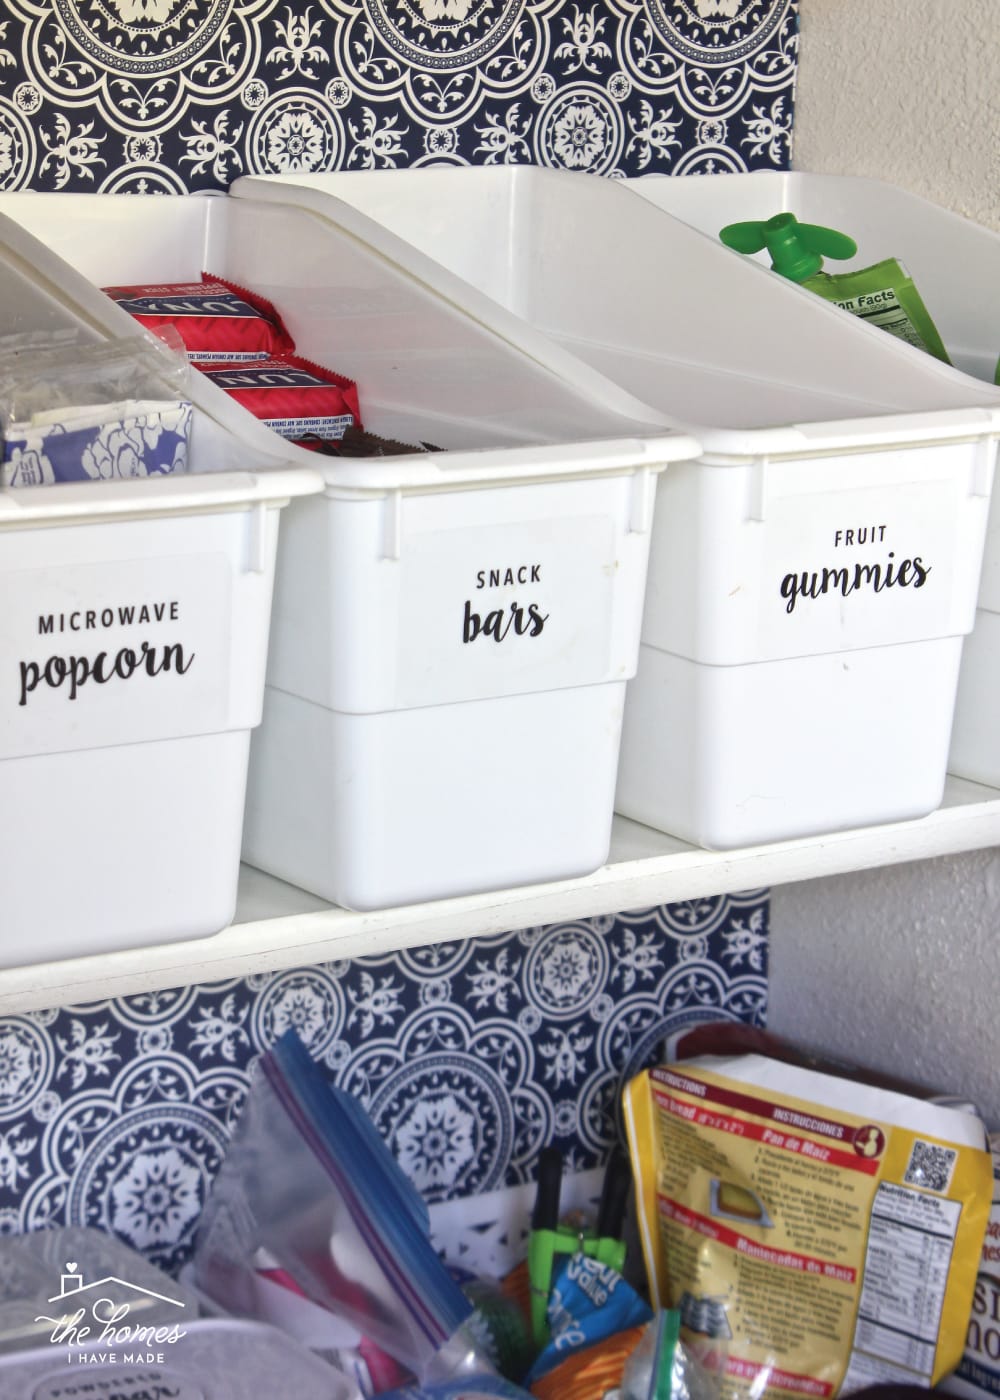 Really Good Stuff® Stackable Storage Tubs With Locking Lids, Medium